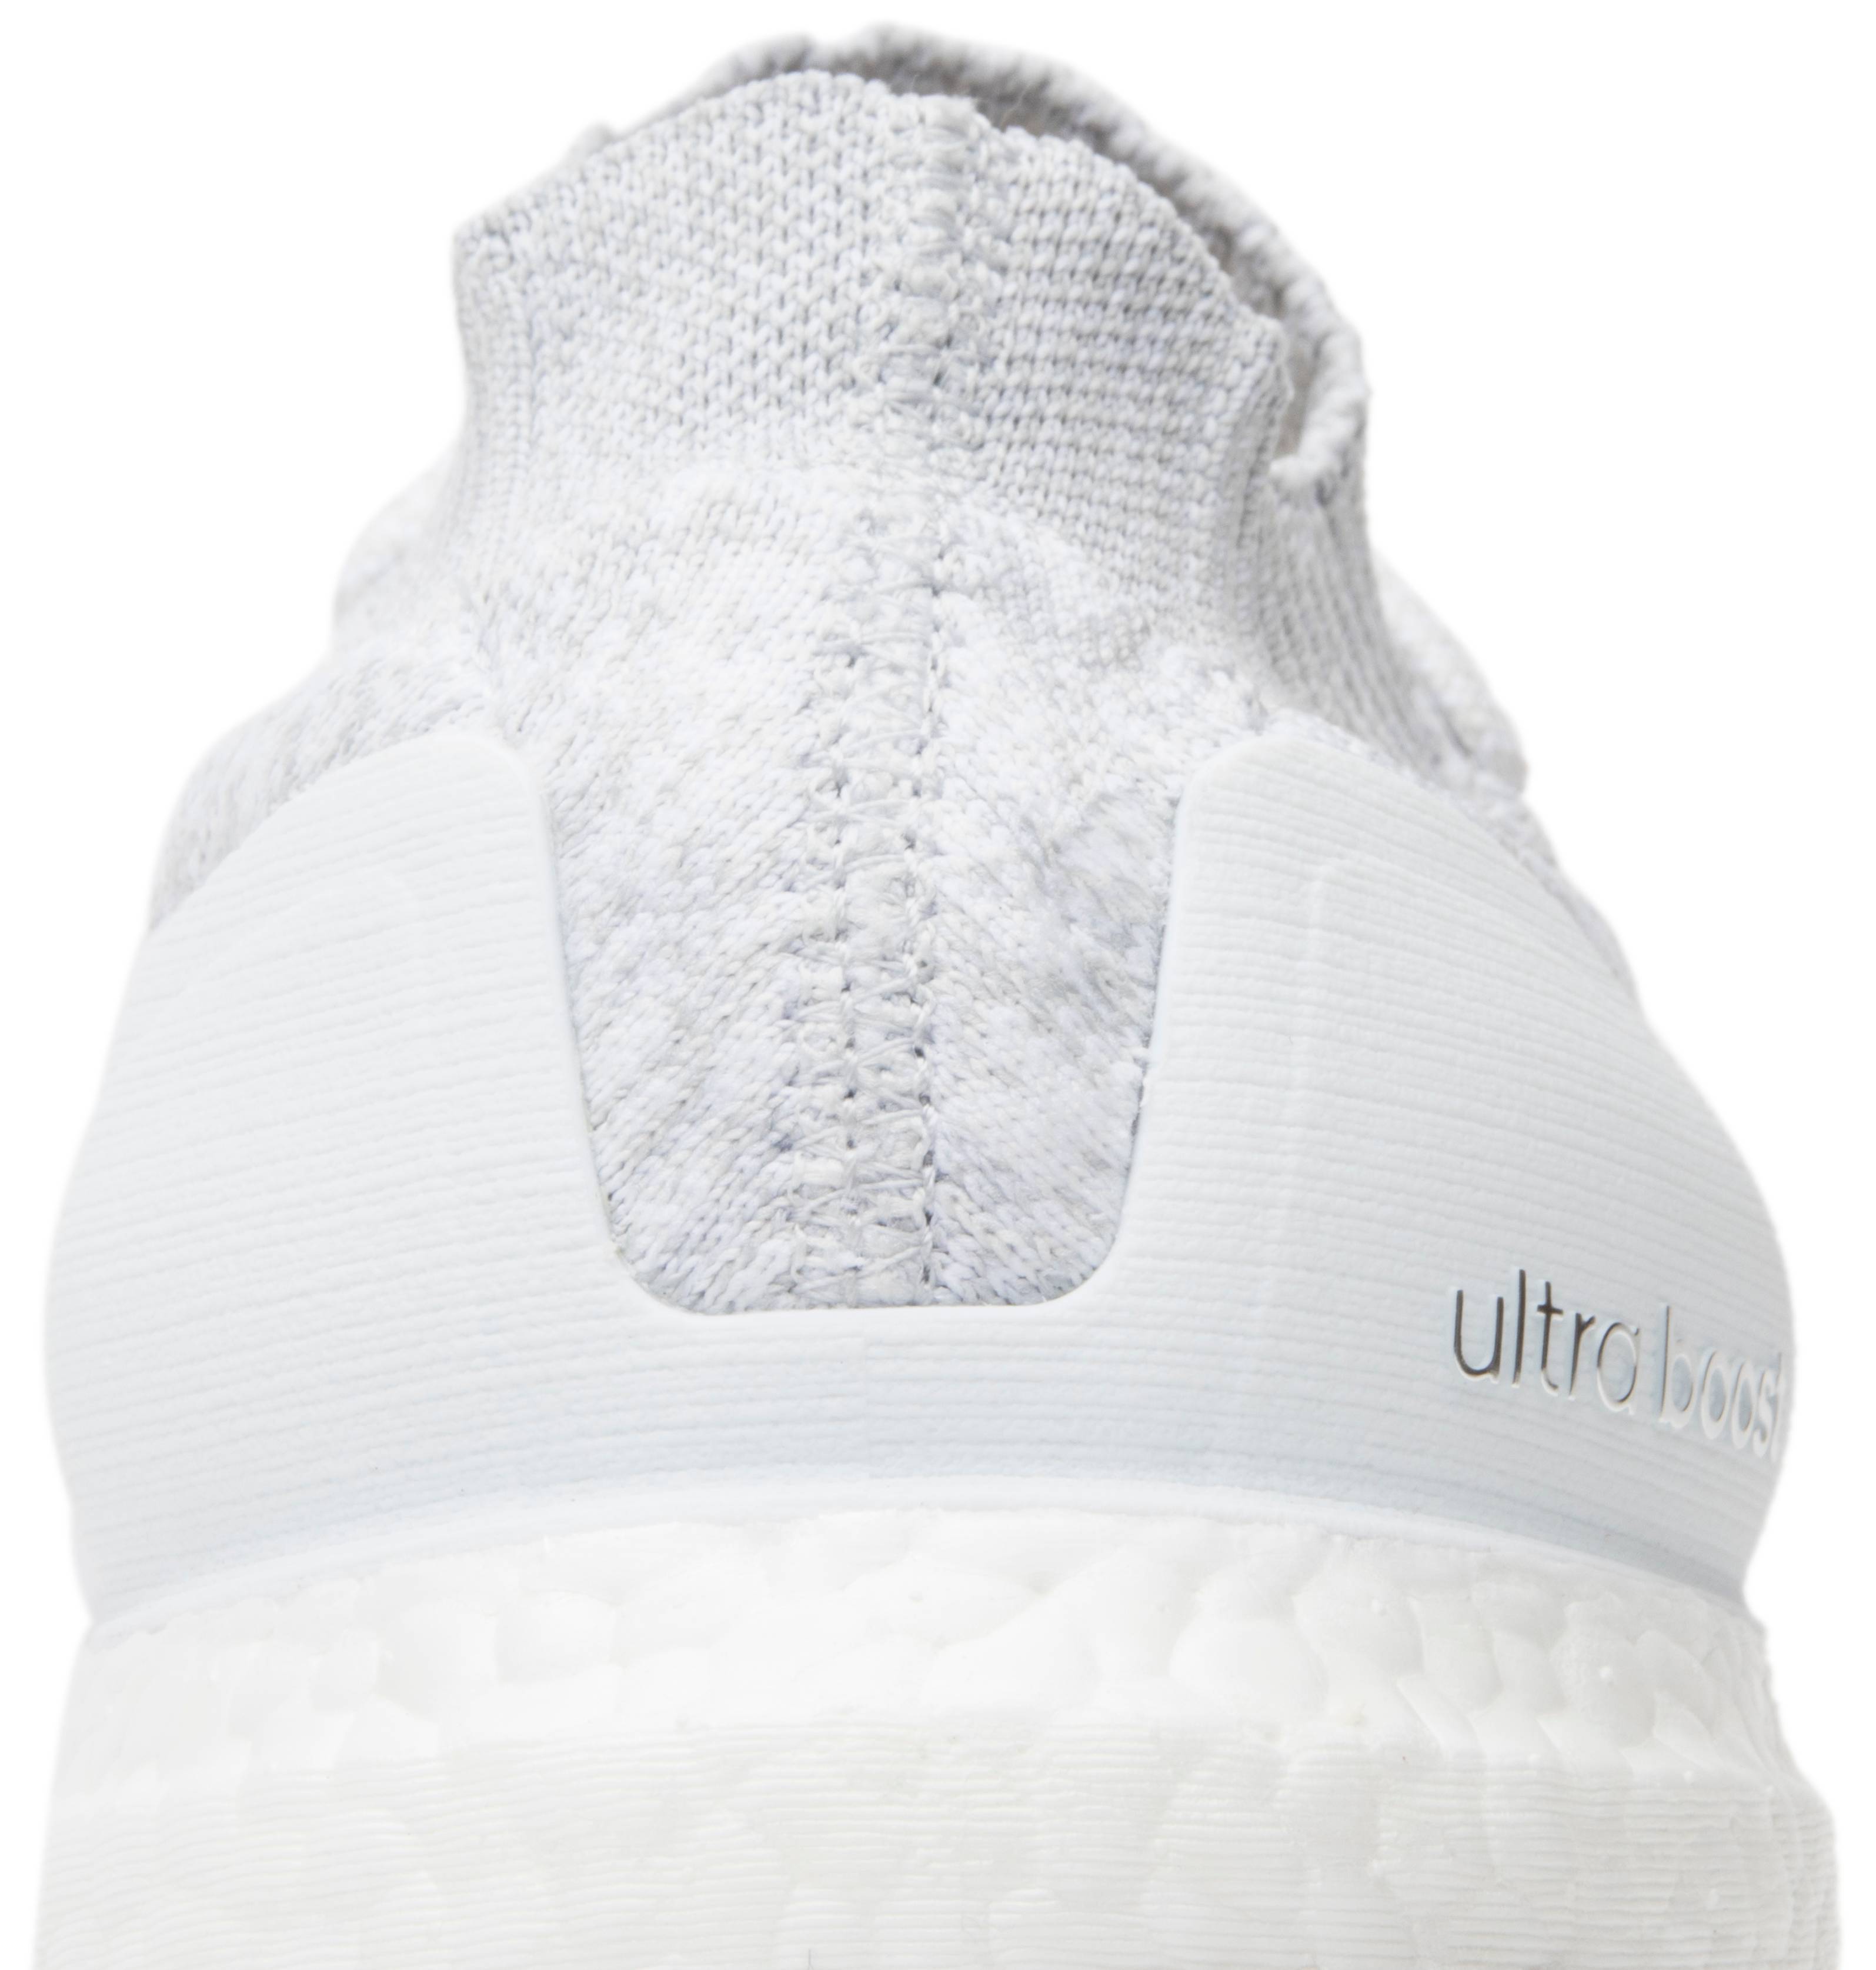 UltraBoost Uncaged 'Triple White' - adidas - BY2549 | GOAT